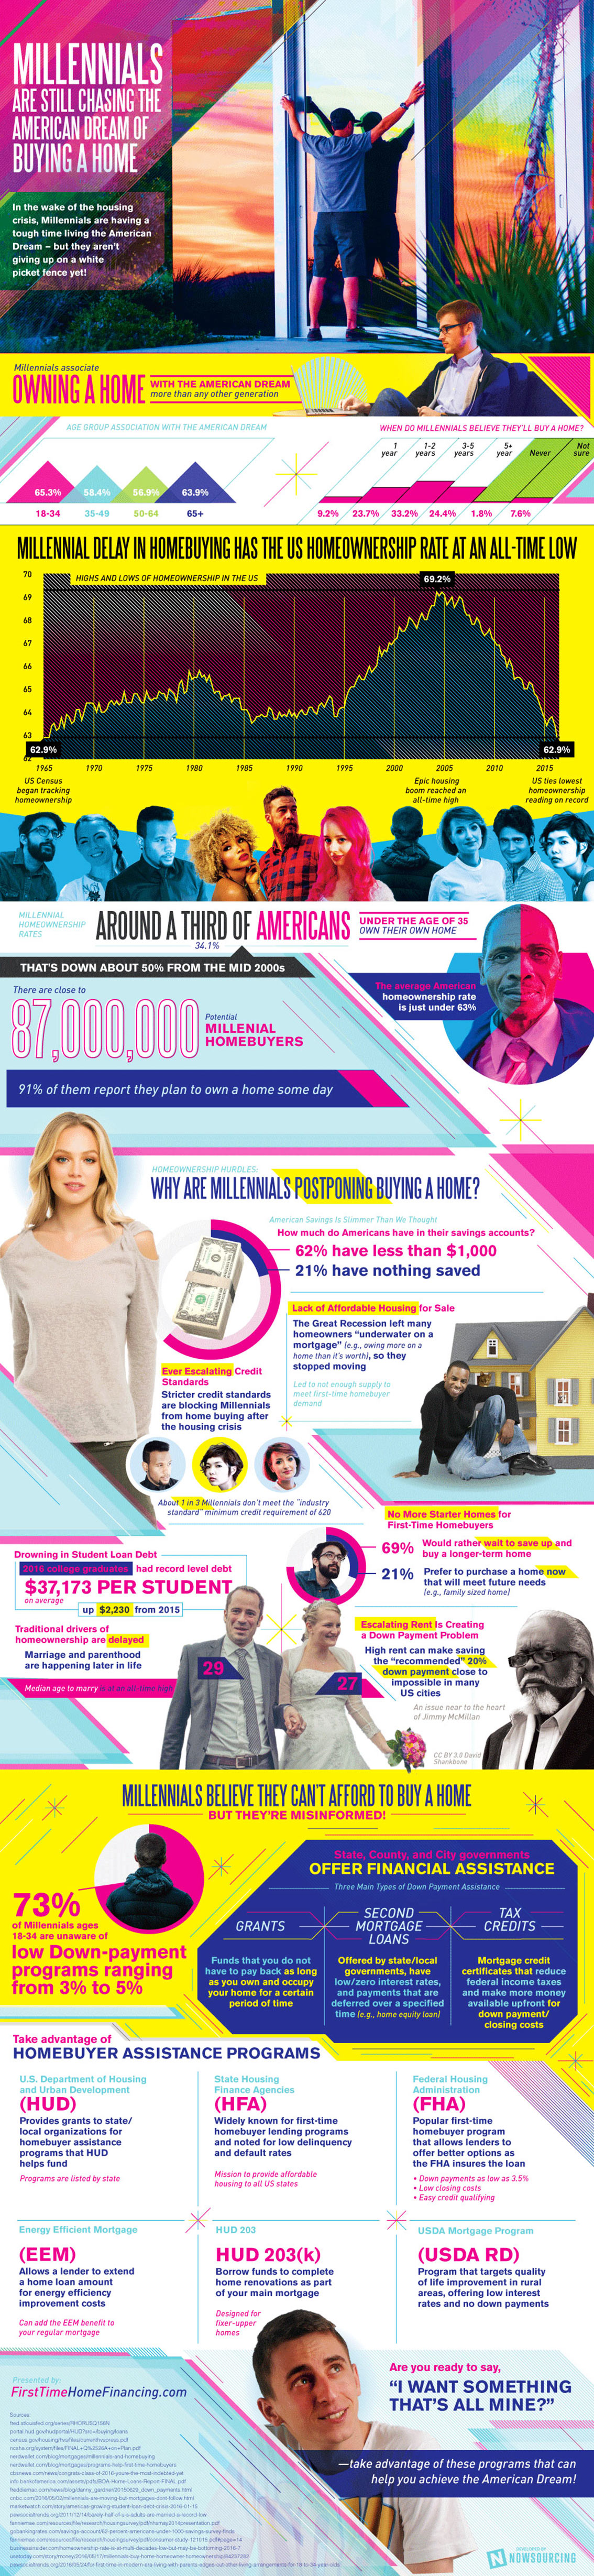 Millennials Postponing Buying a Home - Real Estate Infographic